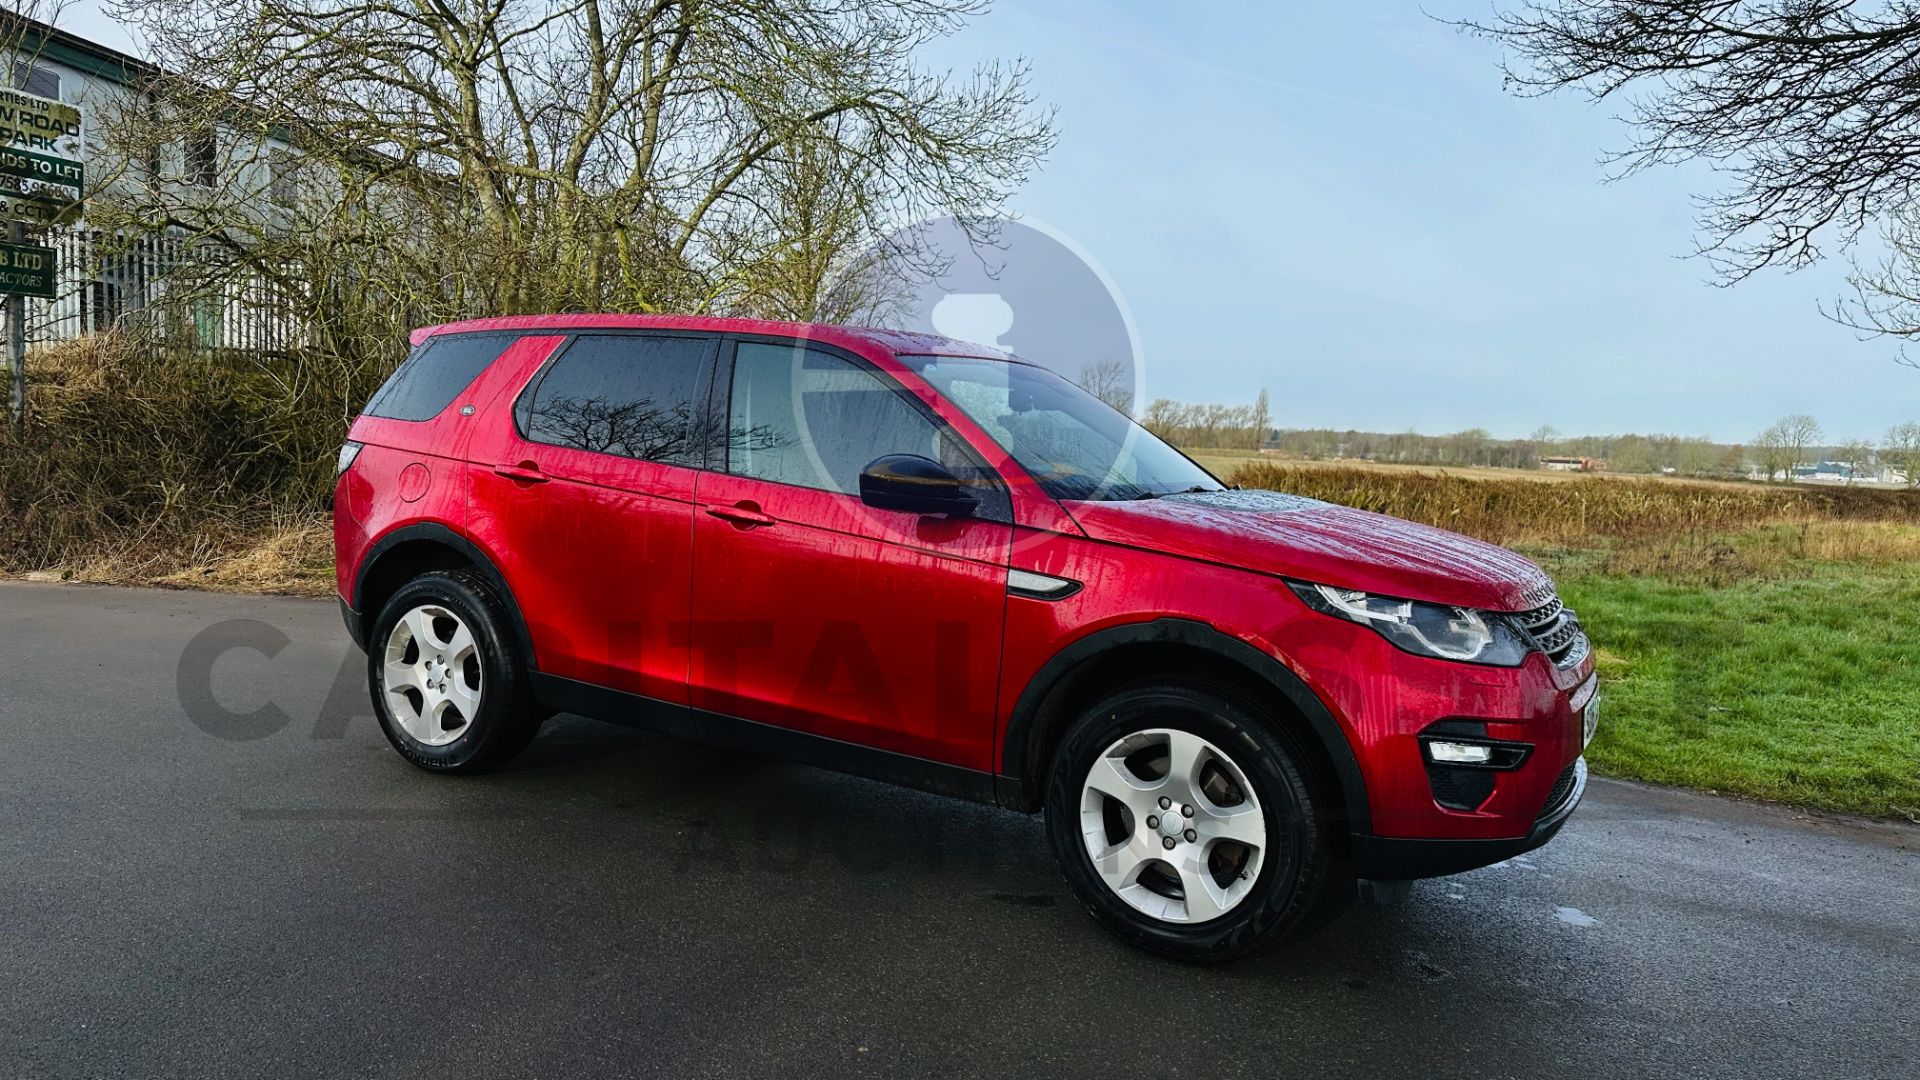 LAND ROVER DISCOVERY SPORT *PURE SPECIAL EDITION* SUV (2018 - EURO 6) 2.0 TD4 - AUTO STOP/START - Image 2 of 48